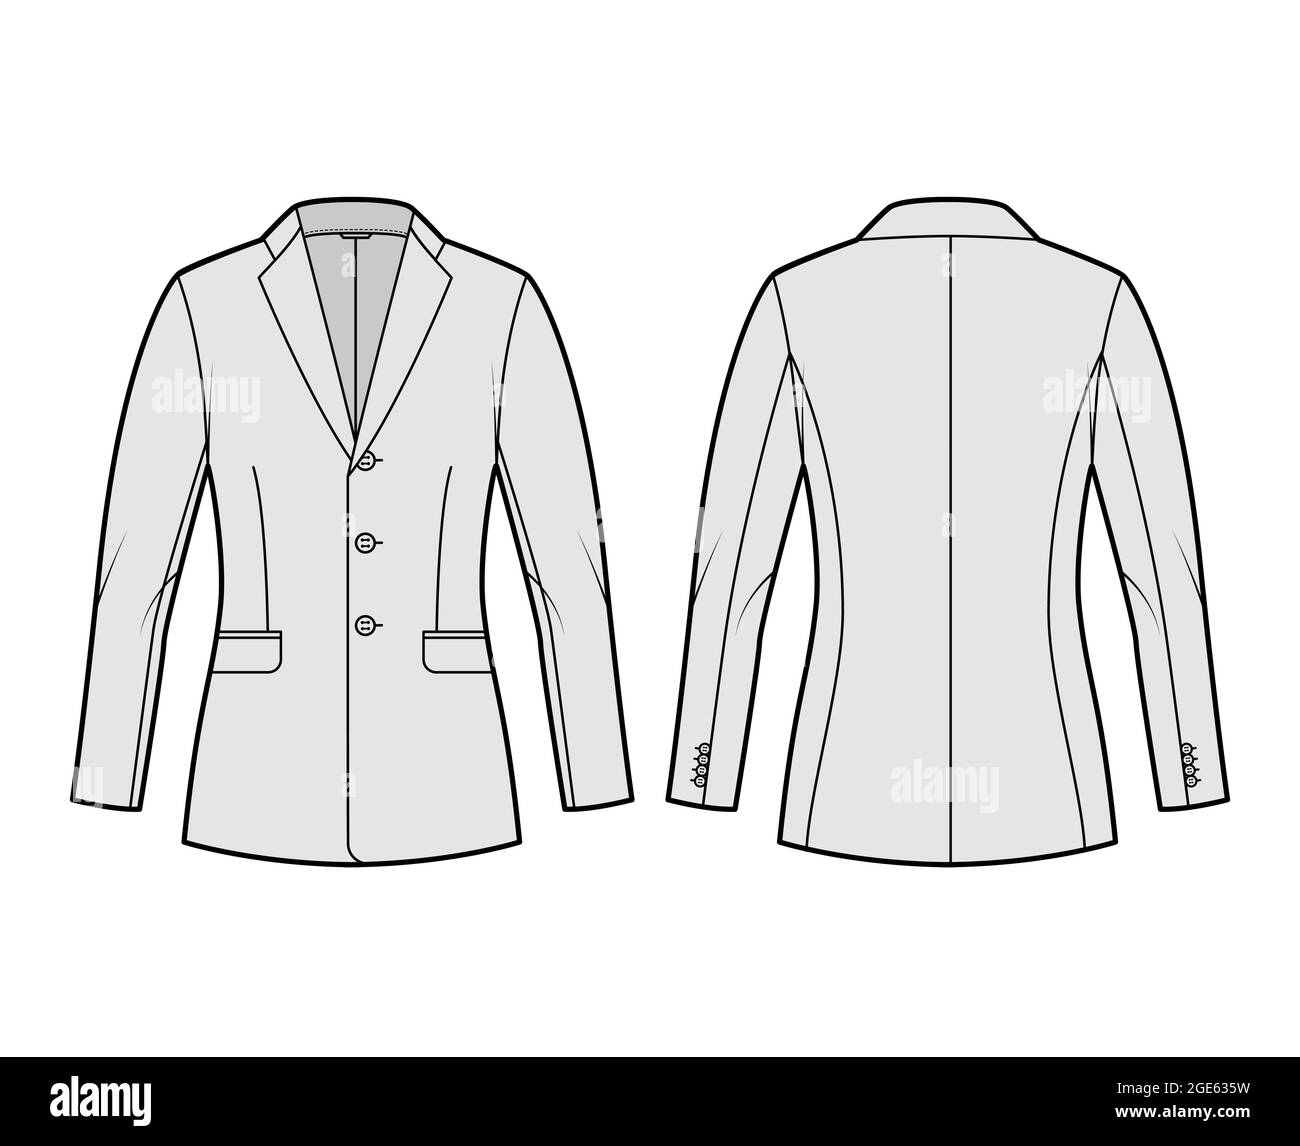 Blazer fitted jacket suit technical fashion illustration with single breasted, notched lapel collar, flap pockets, fitted body, hip length. Flat template front, back, grey color. Women, men CAD mockup Stock Vector